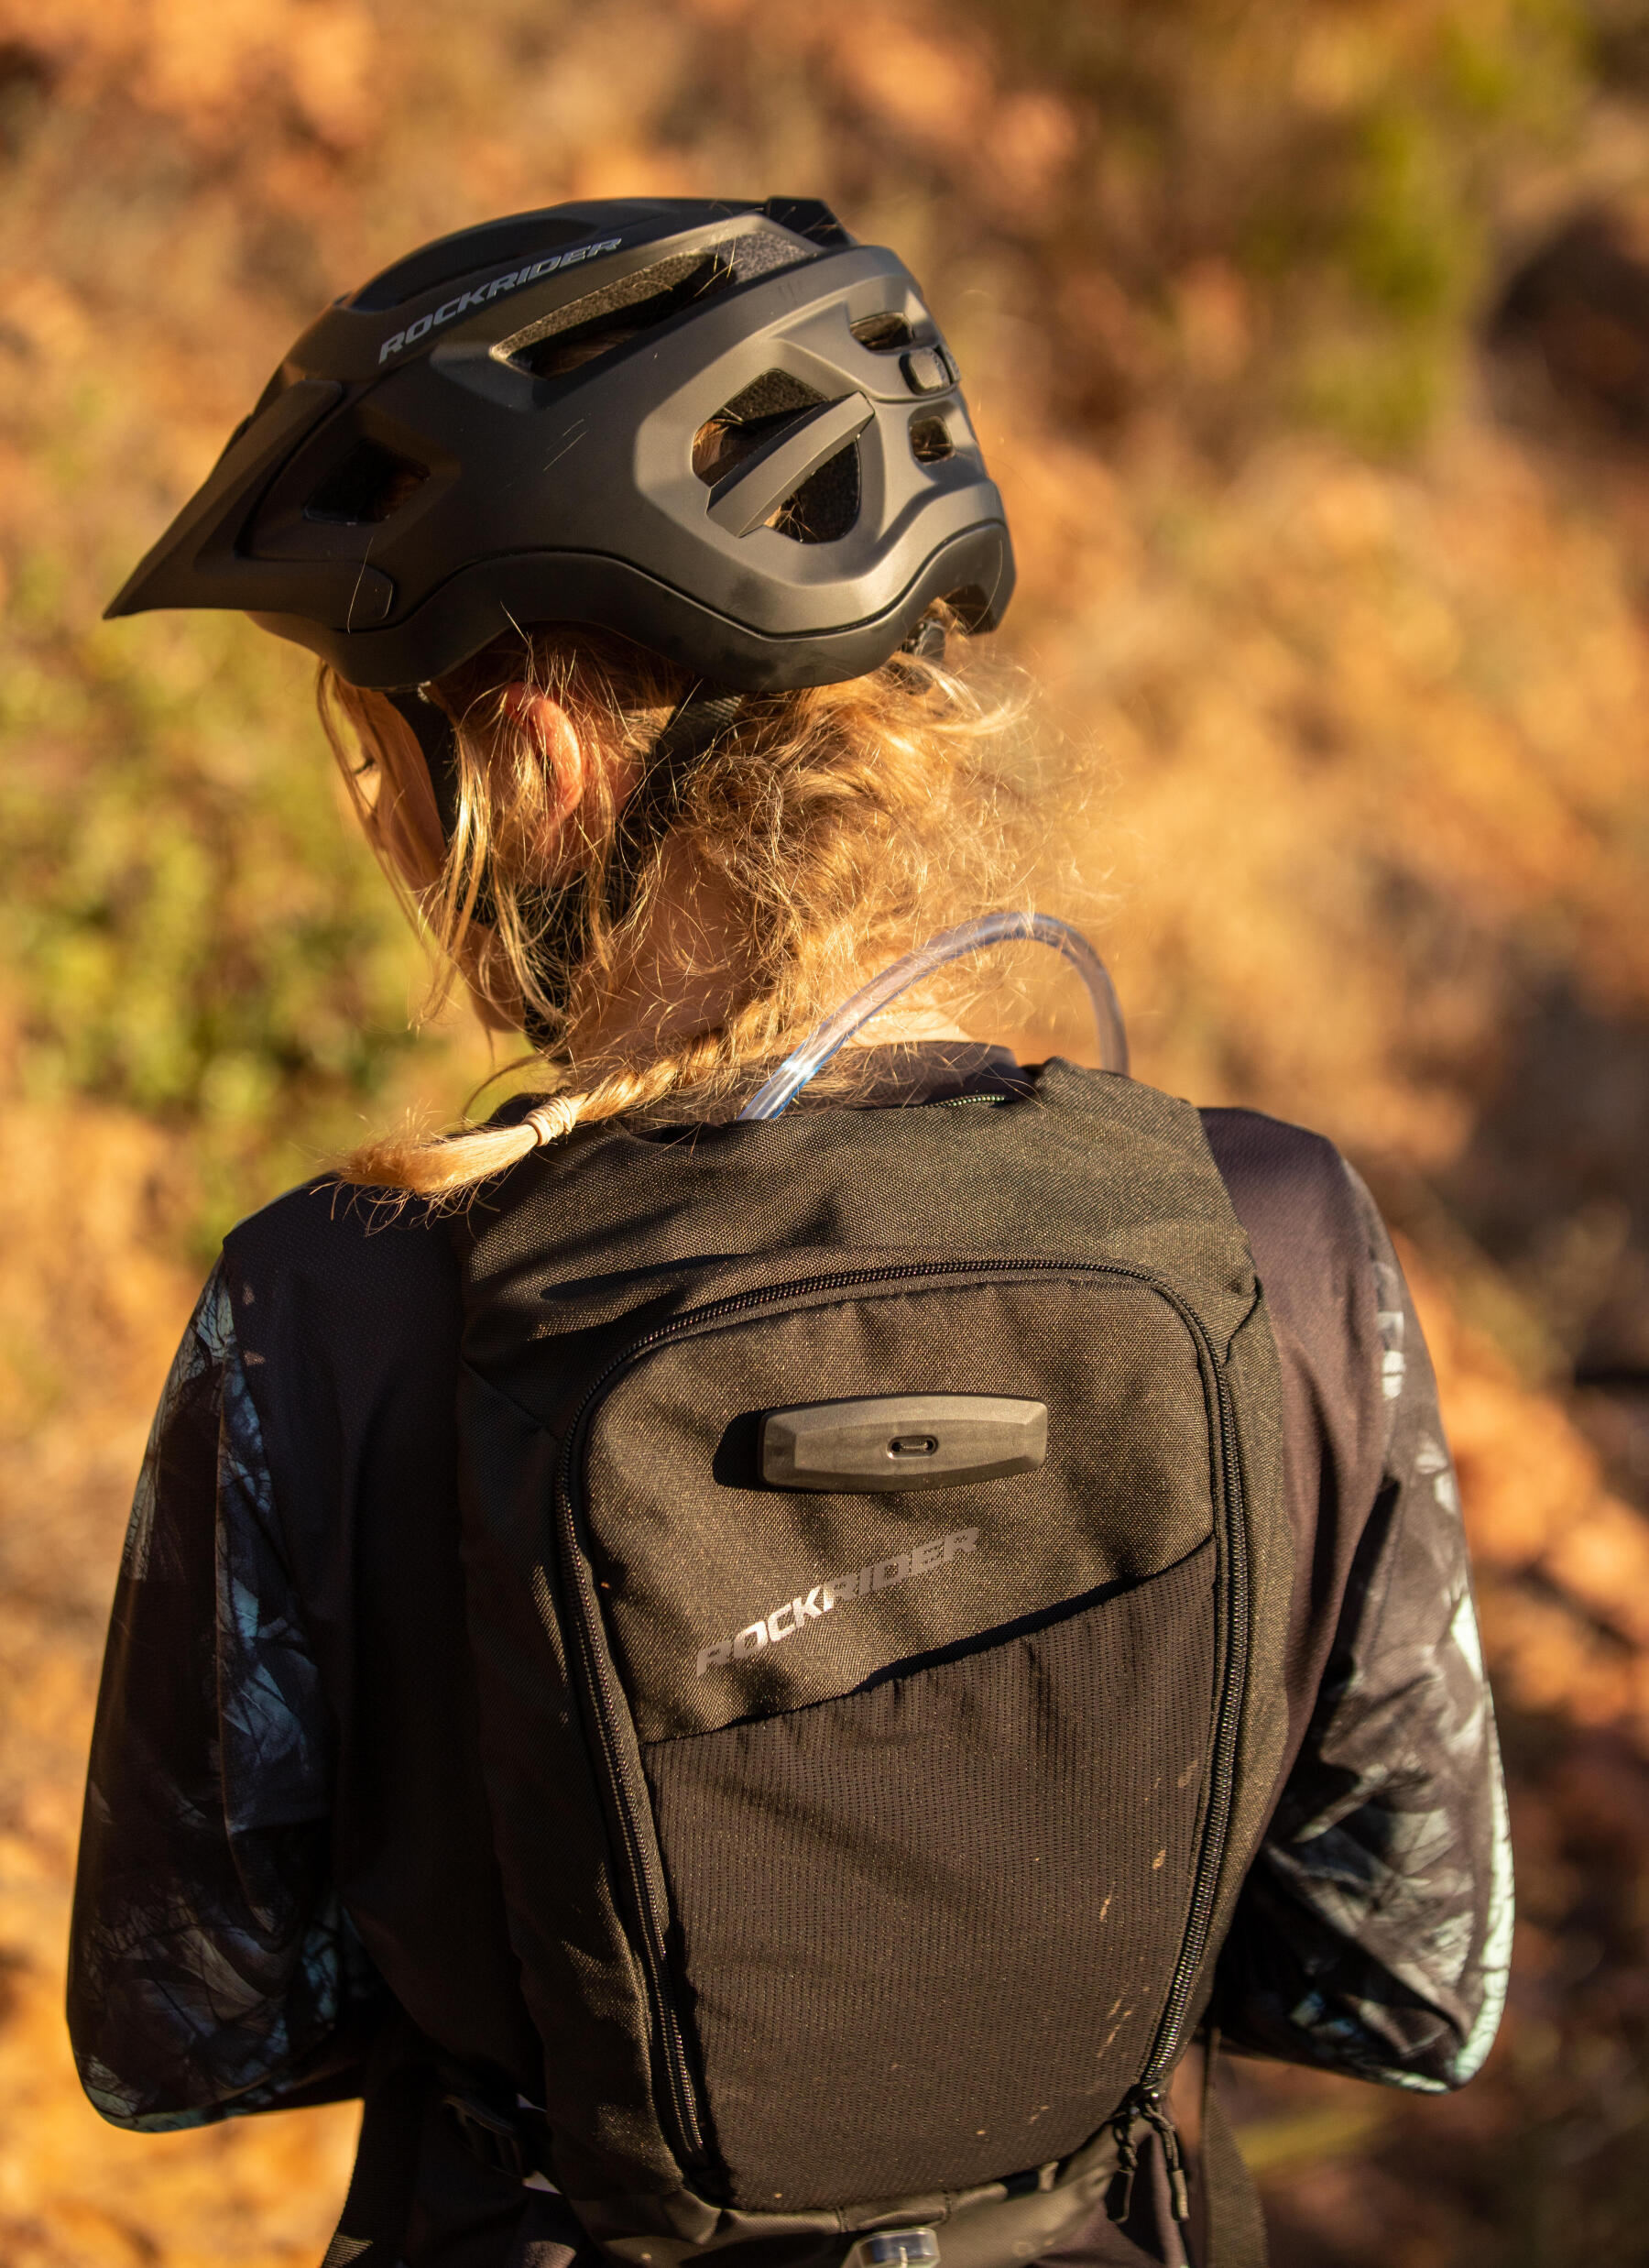 HOW TO LOOK AFTER YOUR HYDRATION PACK